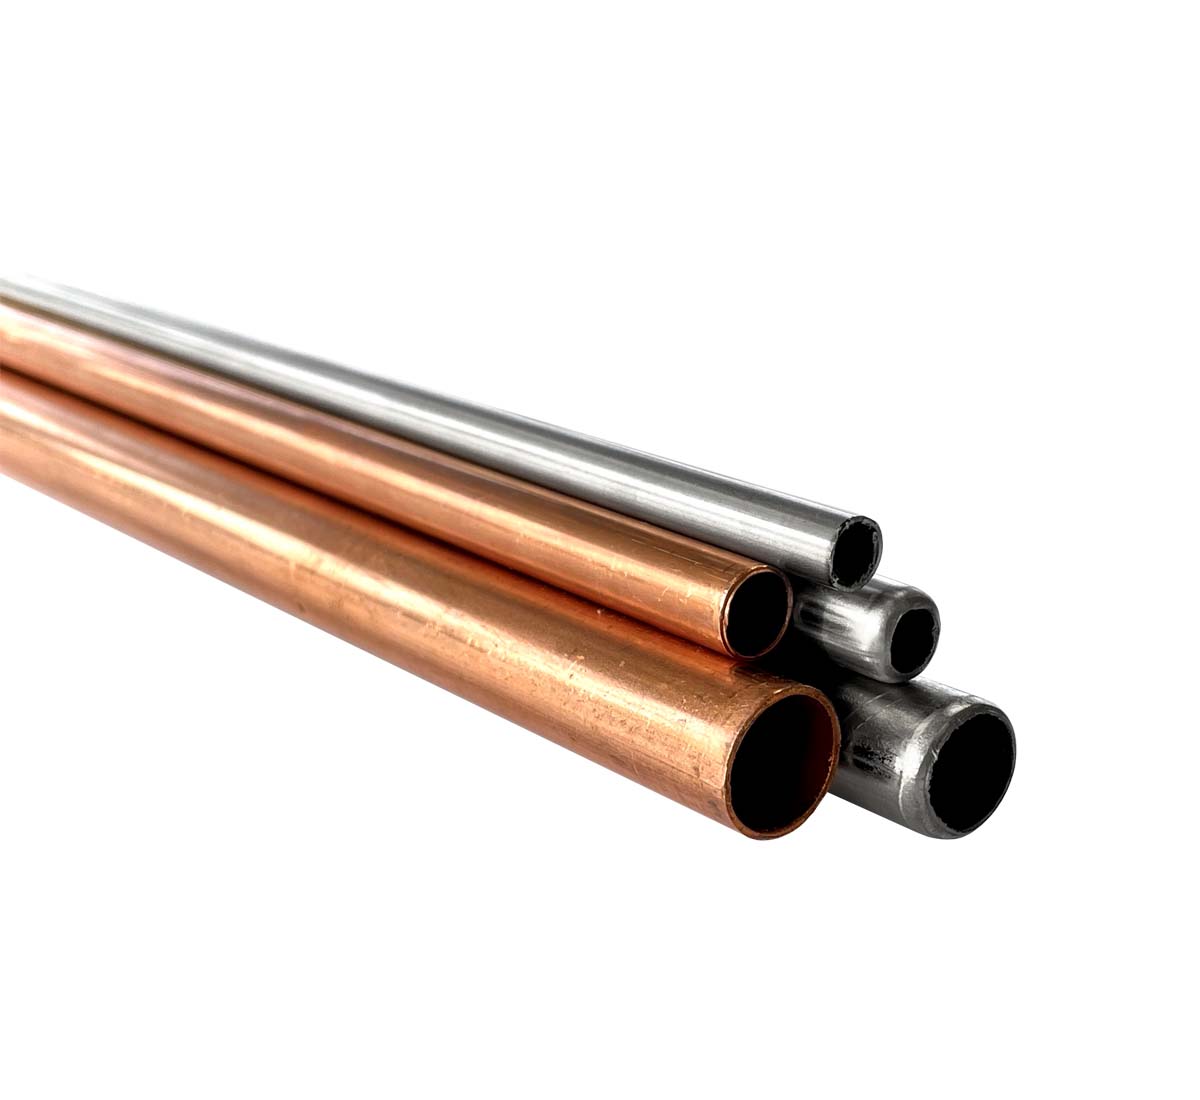 A picture of welded tubes in copper and in stainless steel